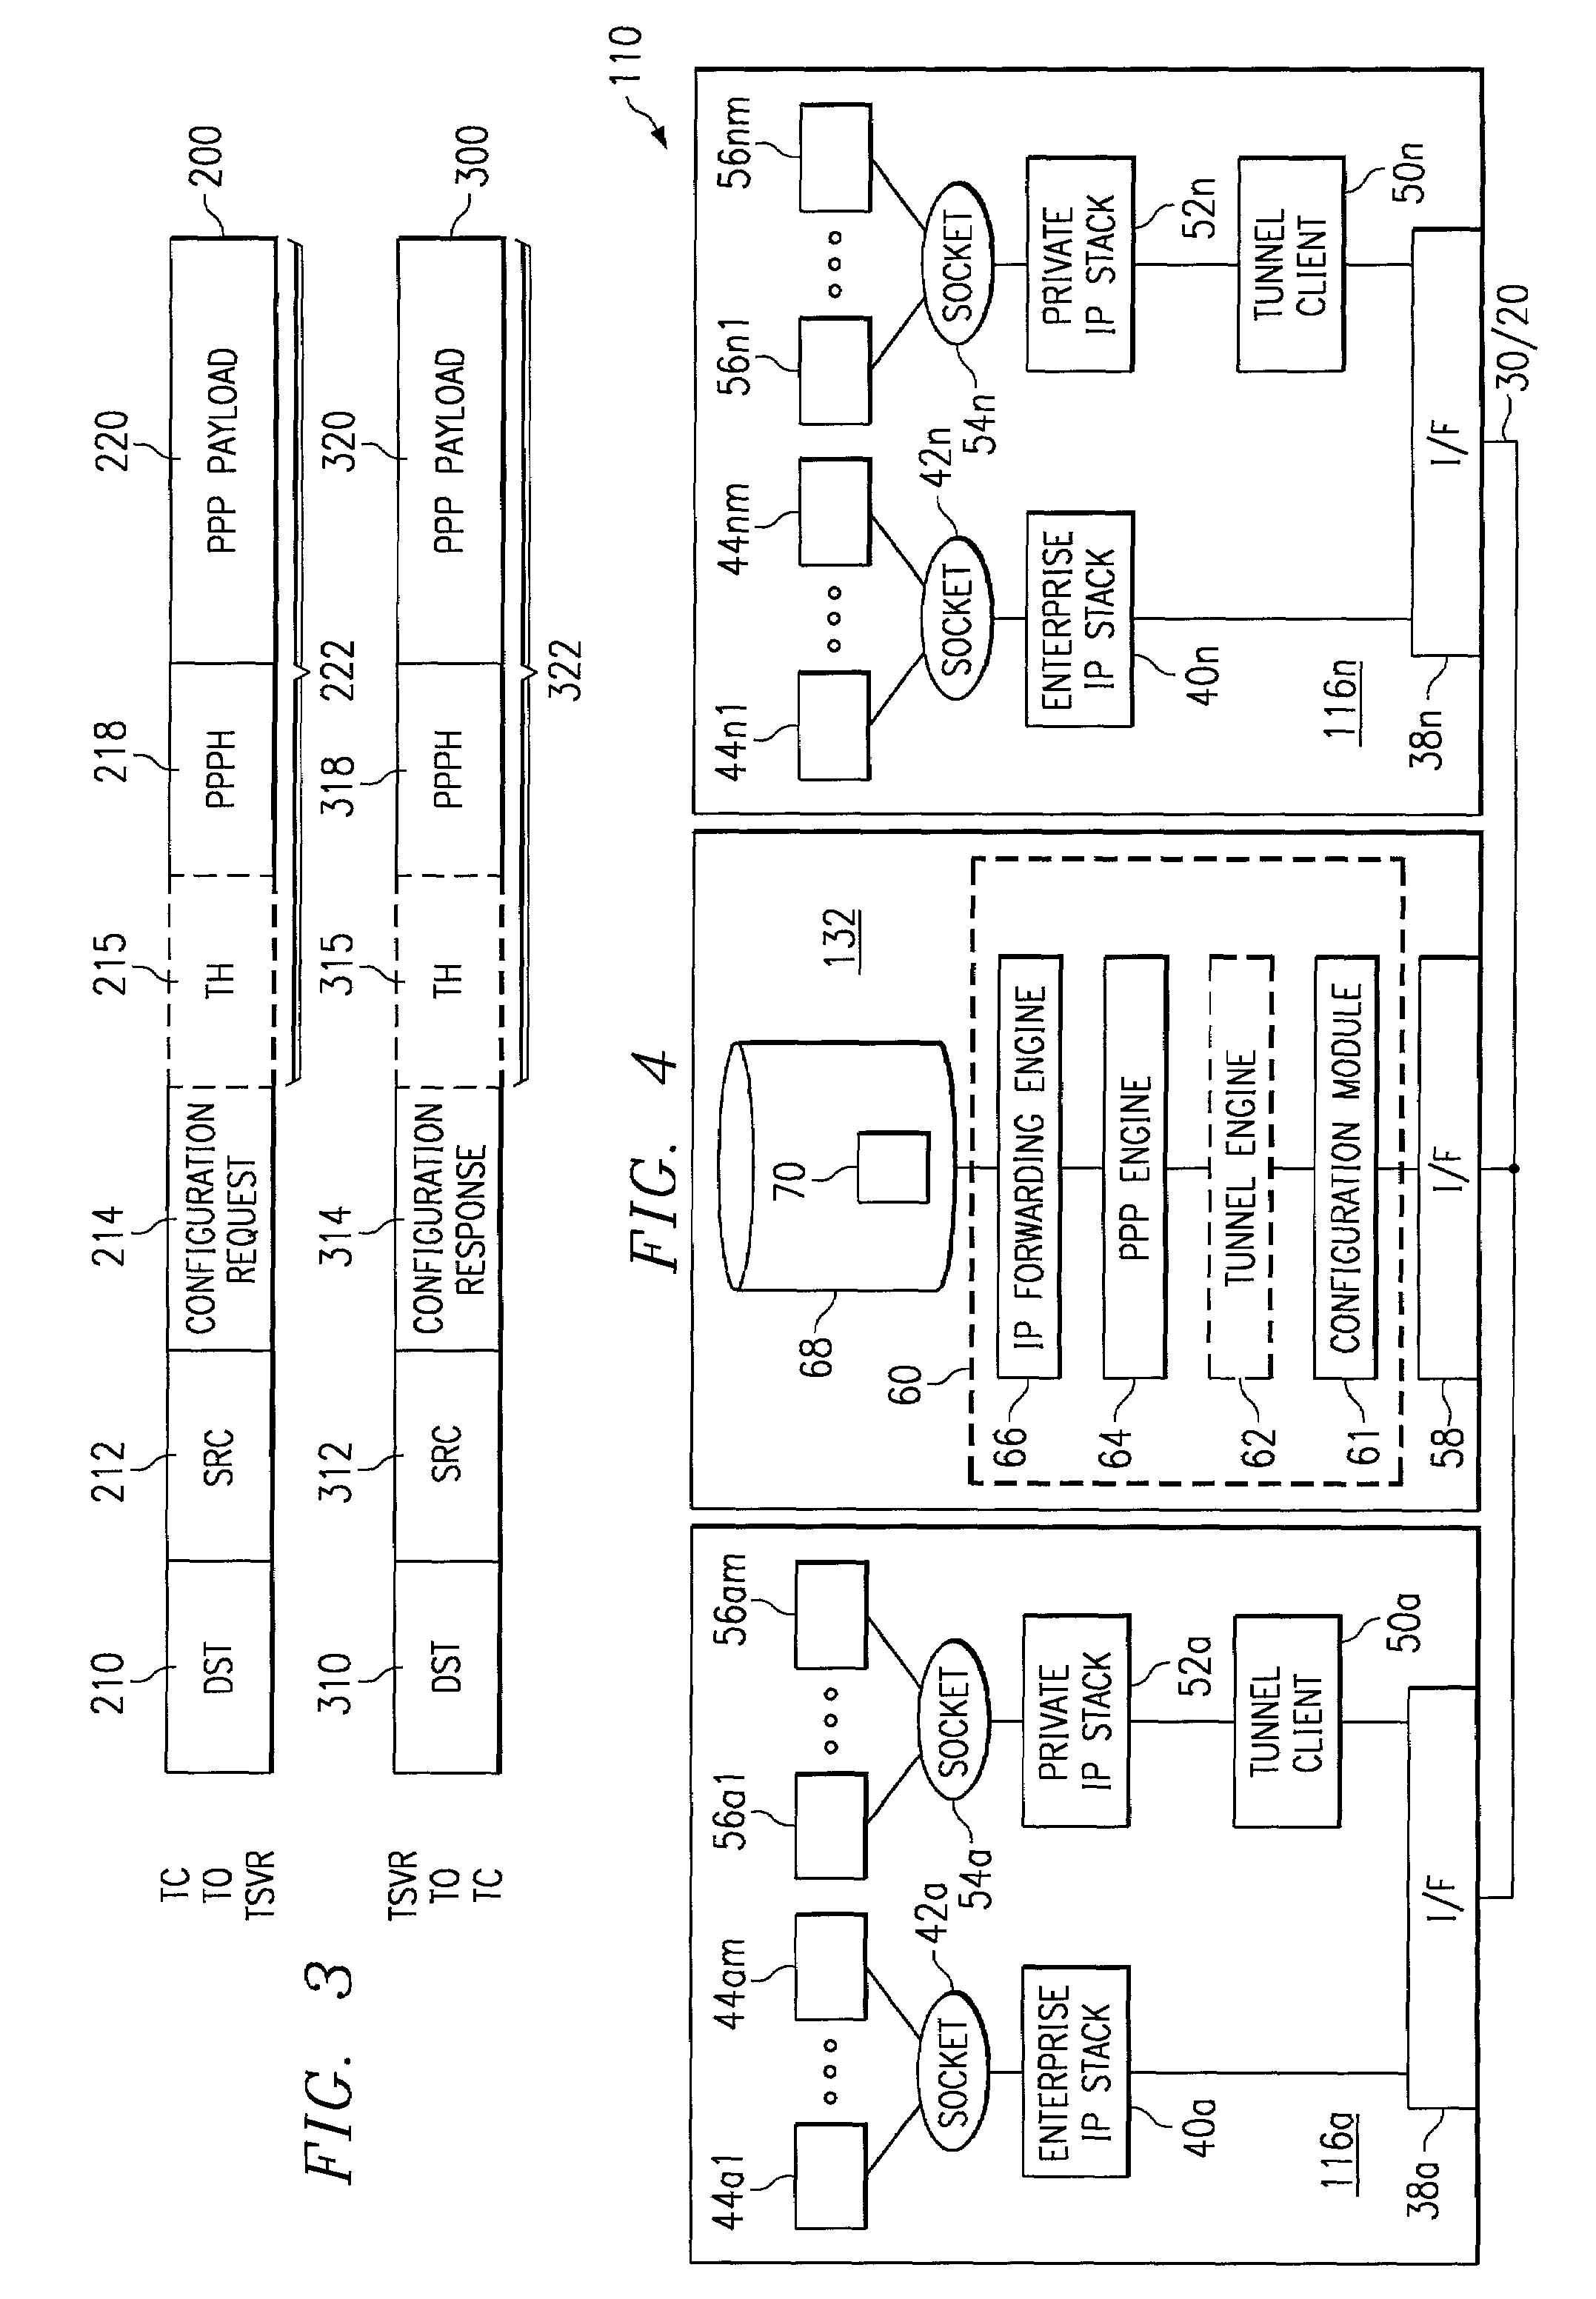 Method and apparatus for managing tunneled communications in an enterprise network